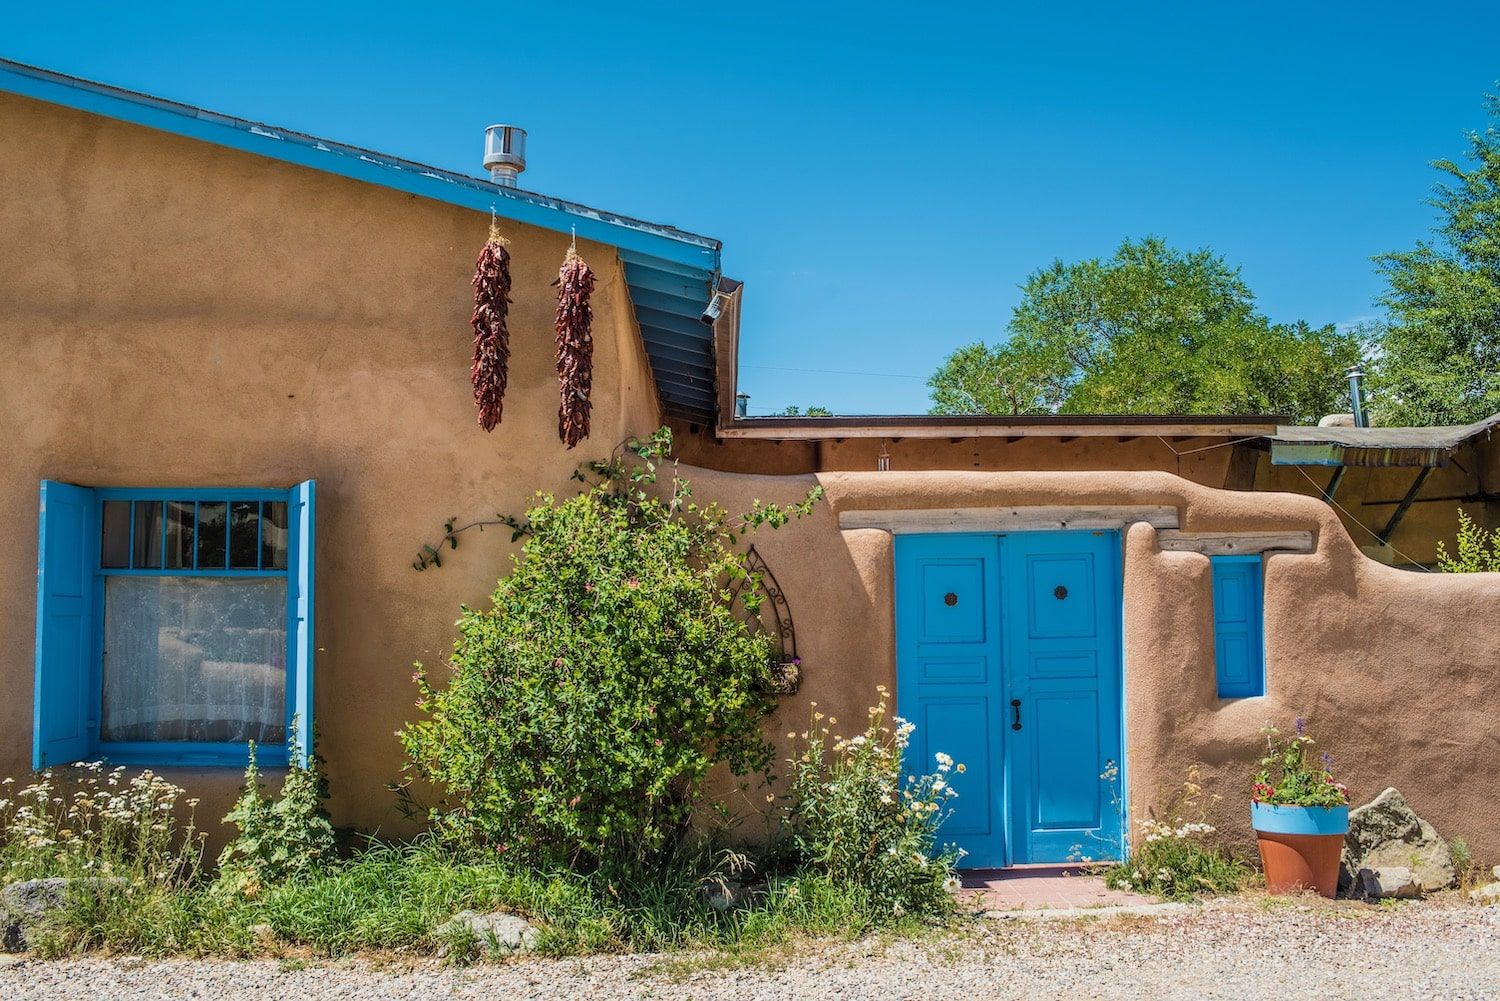 Taos New Mexico &#038; the Land of Enchantment